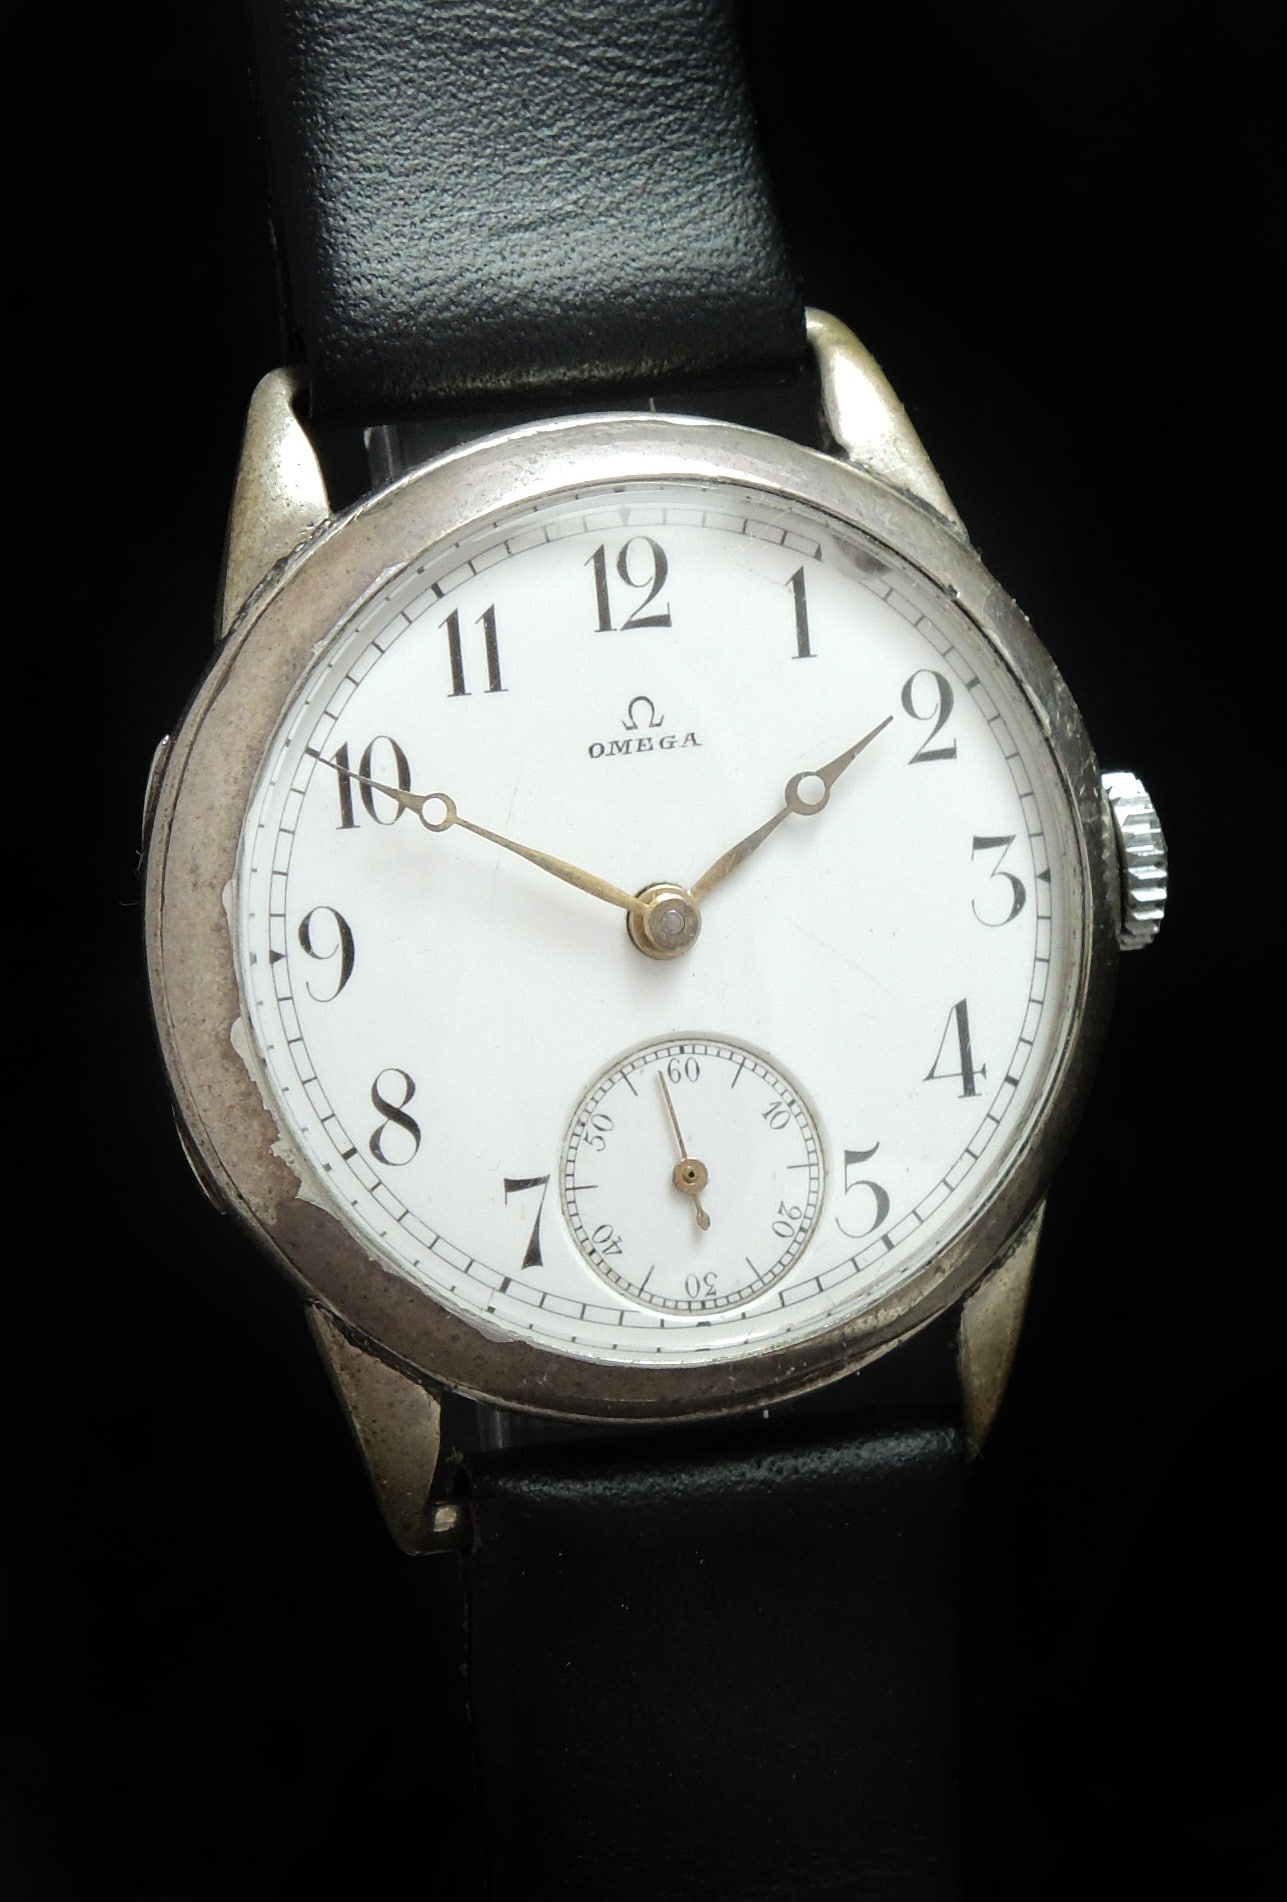 Outstanding 1930 Omega with 925 silver case and enamel dial | Vintage ...